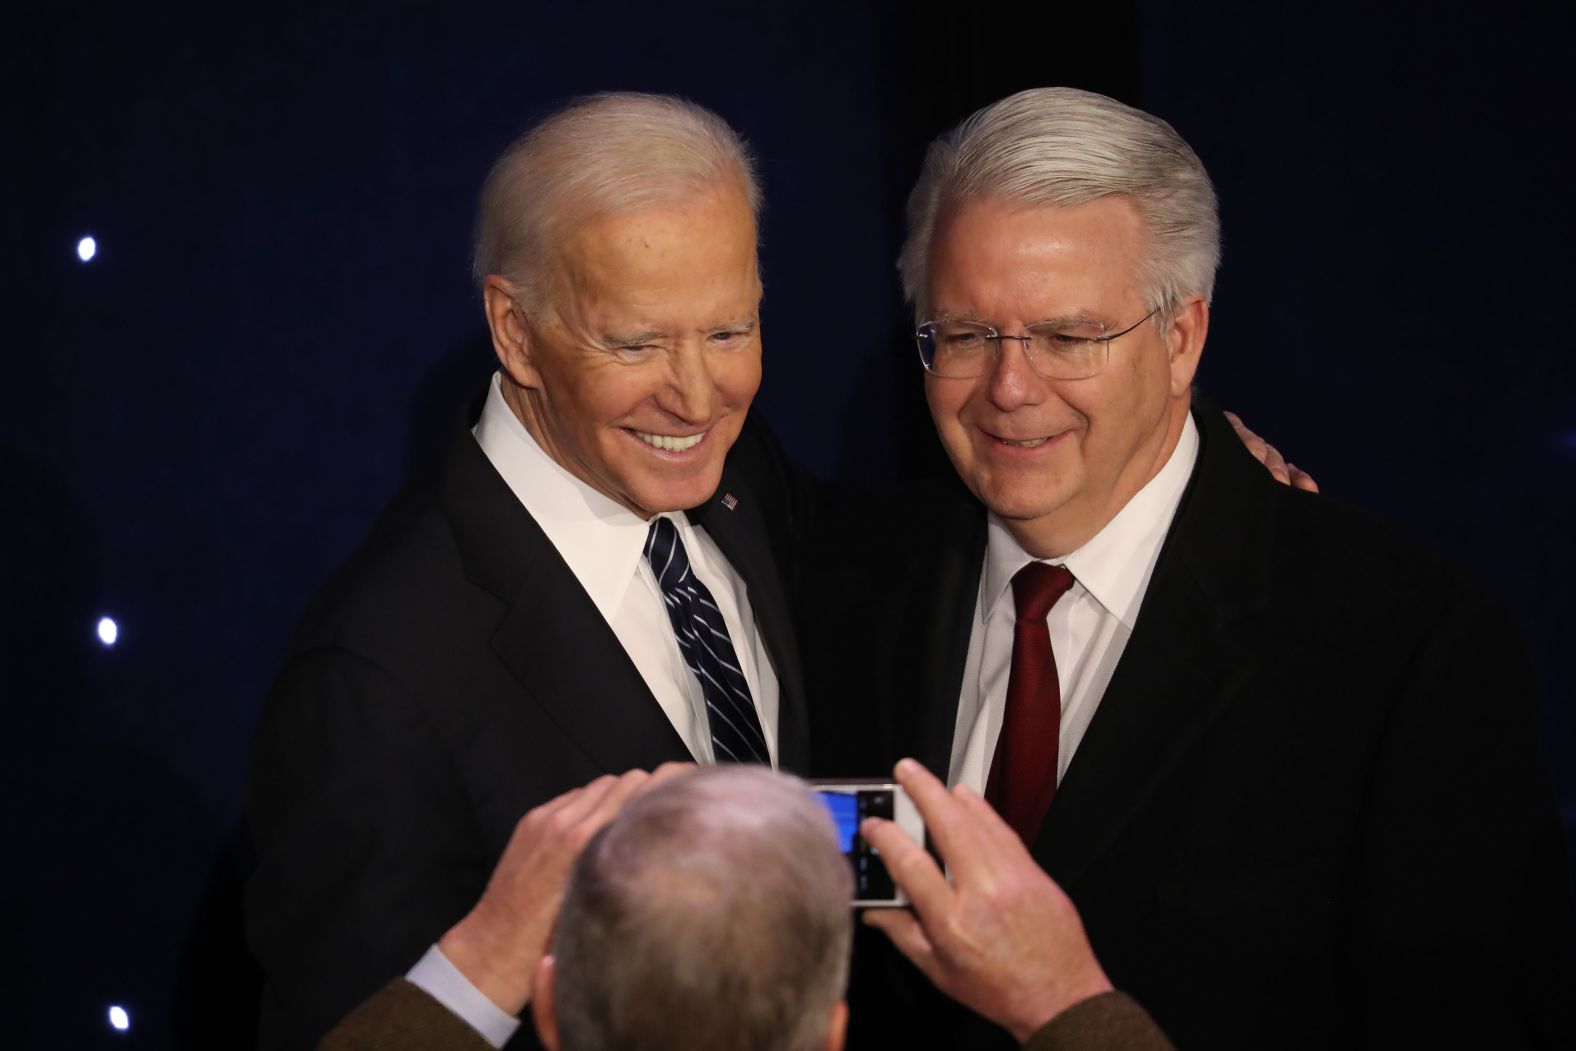 Biden poses for a photo with a supporter after the debate.